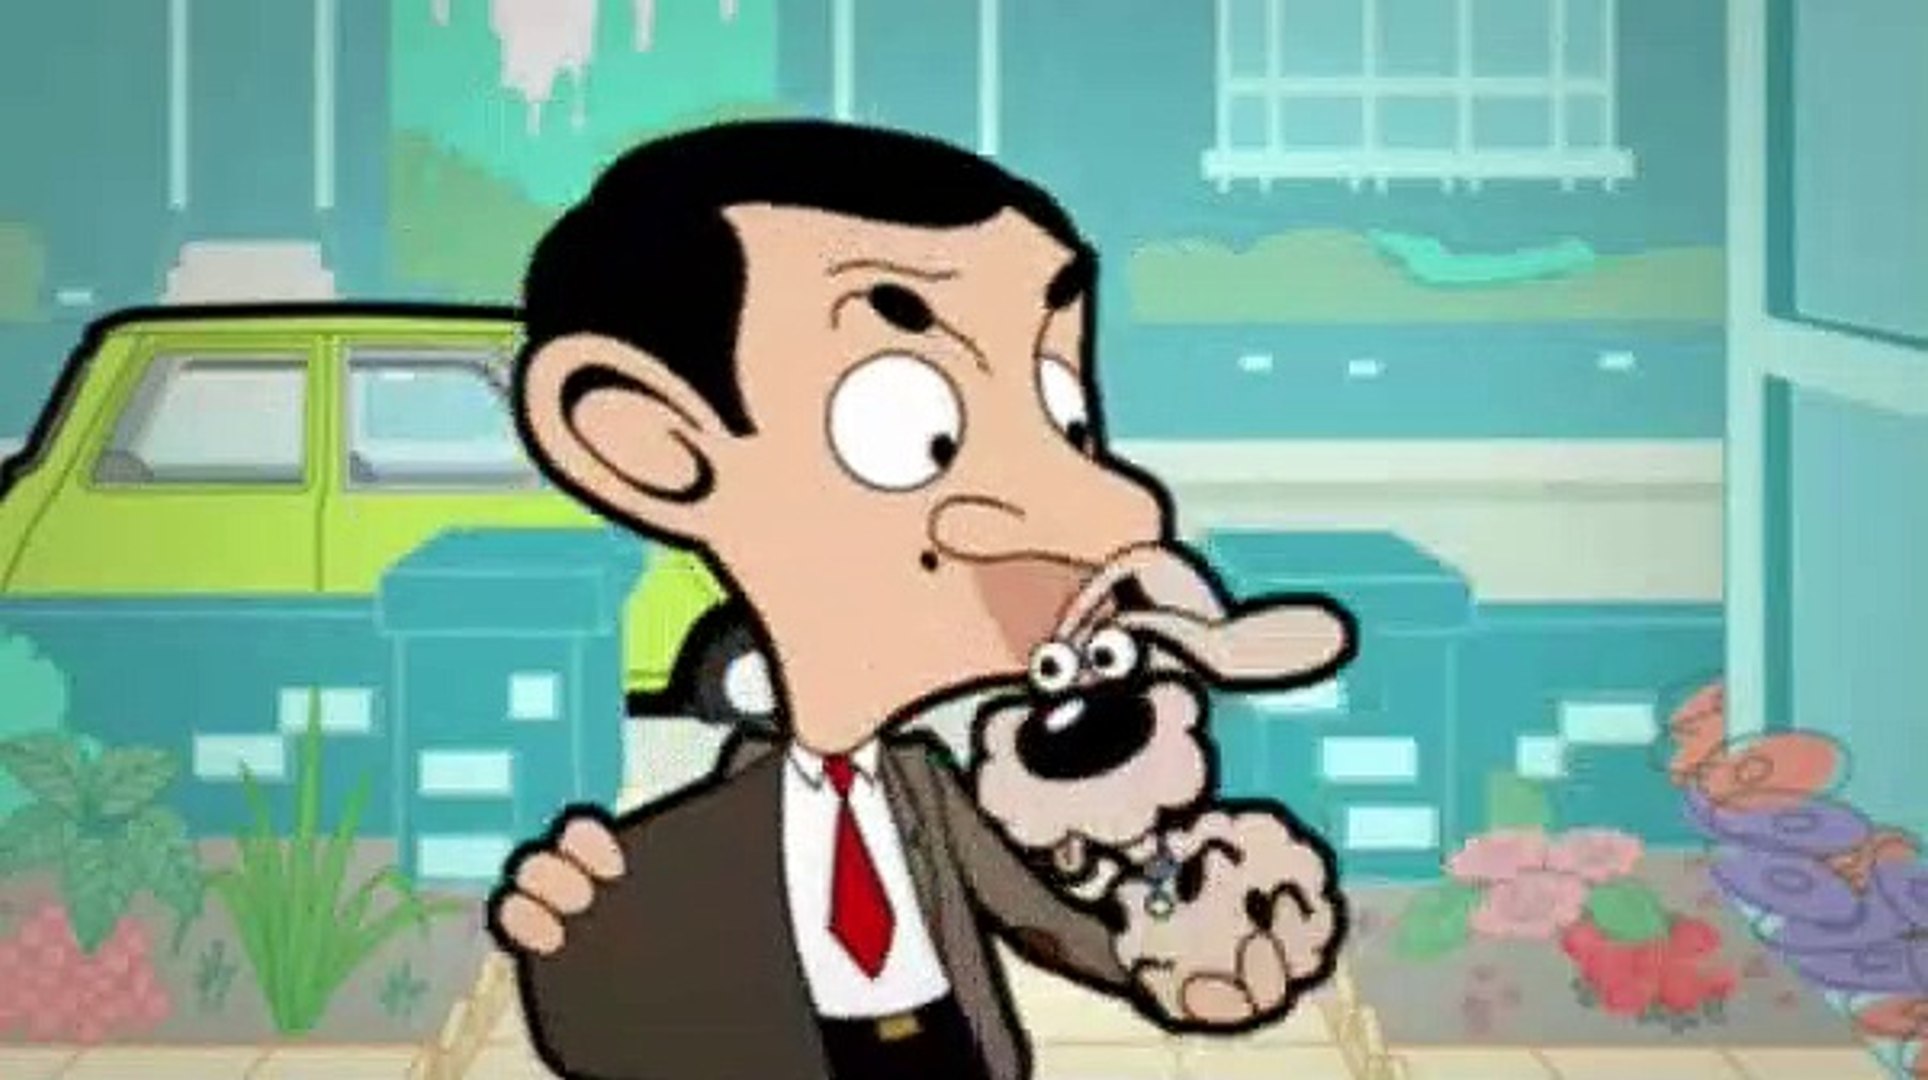 Mr Bean The Animated Series Season 1 Episode 9 - No Pets - video Dailymotion